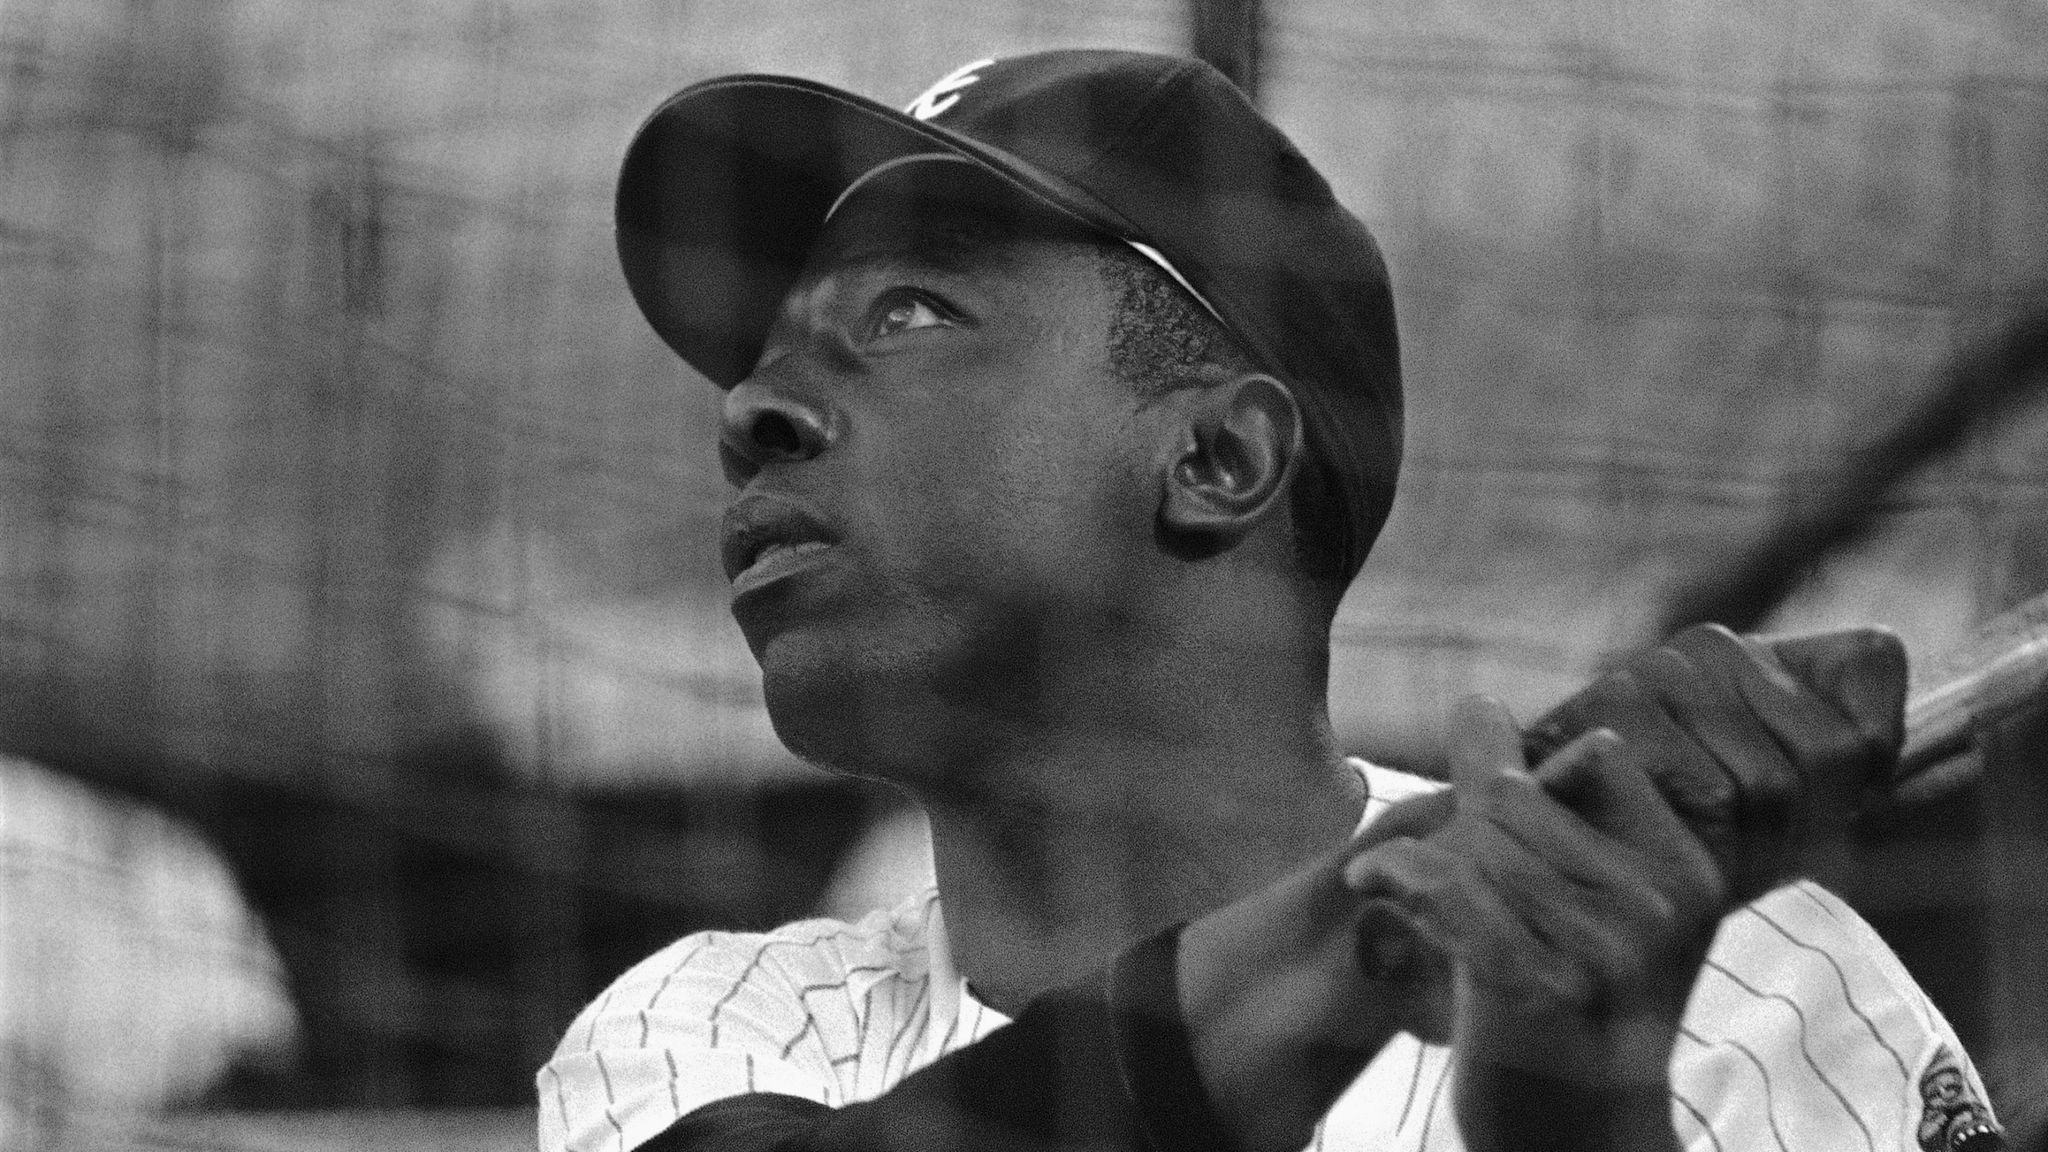 Hank Aaron, Hall of Famer and Braves legend, dies at age 86